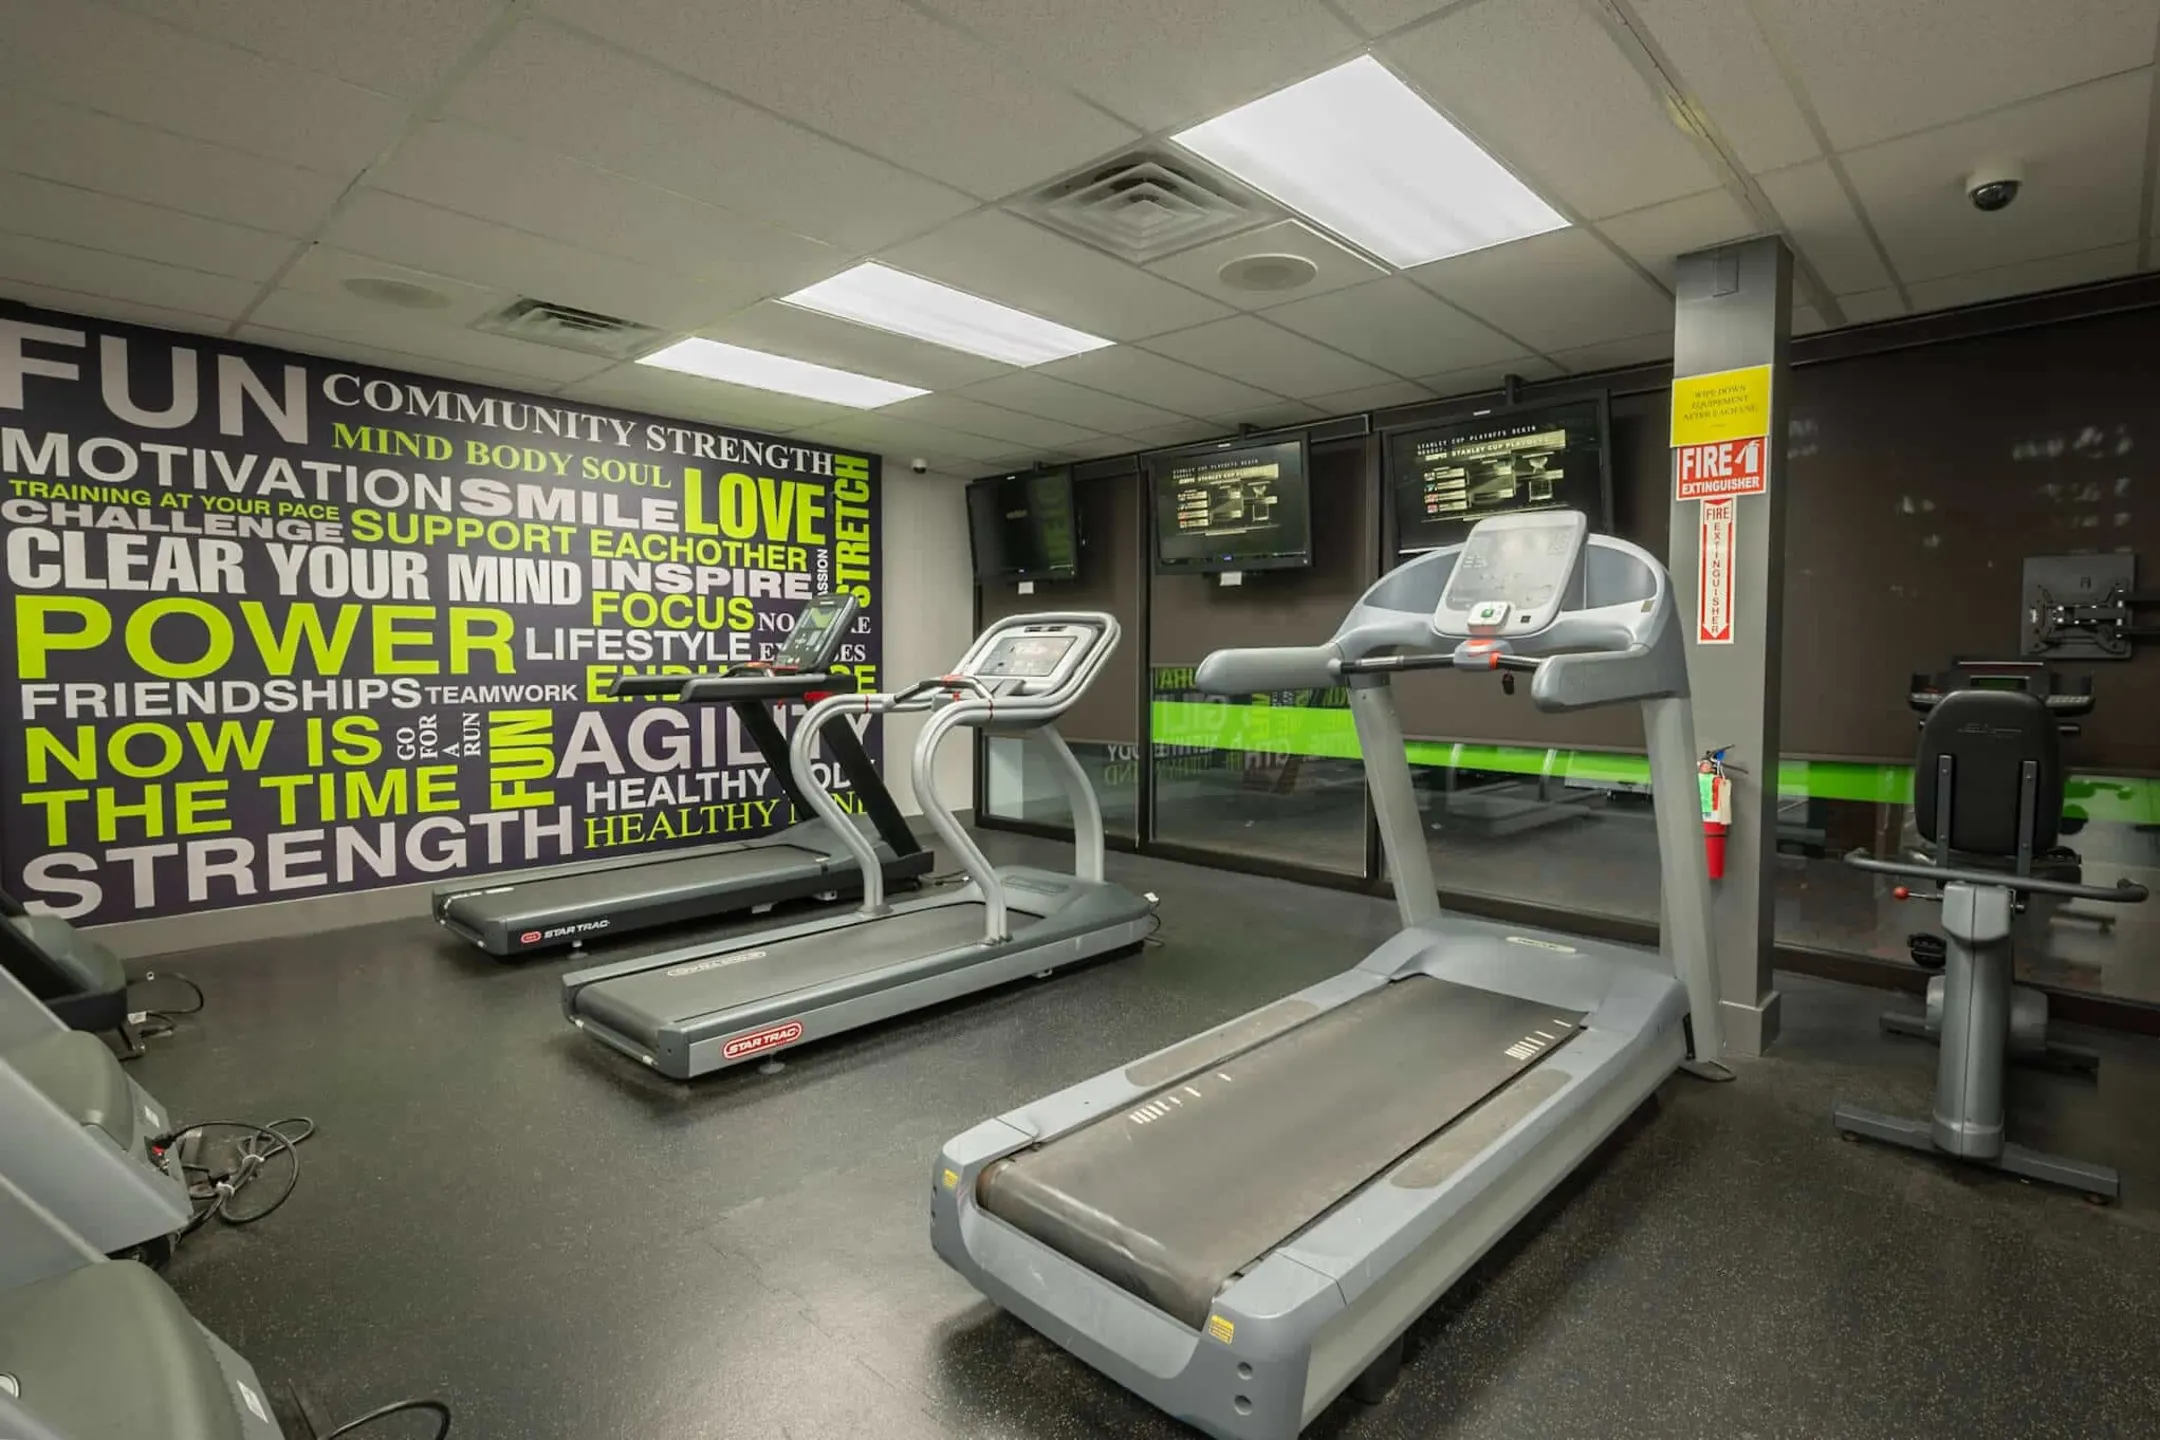 Fitness Weight Room - Drexelbrook Residential Community - Drexel Hill, PA